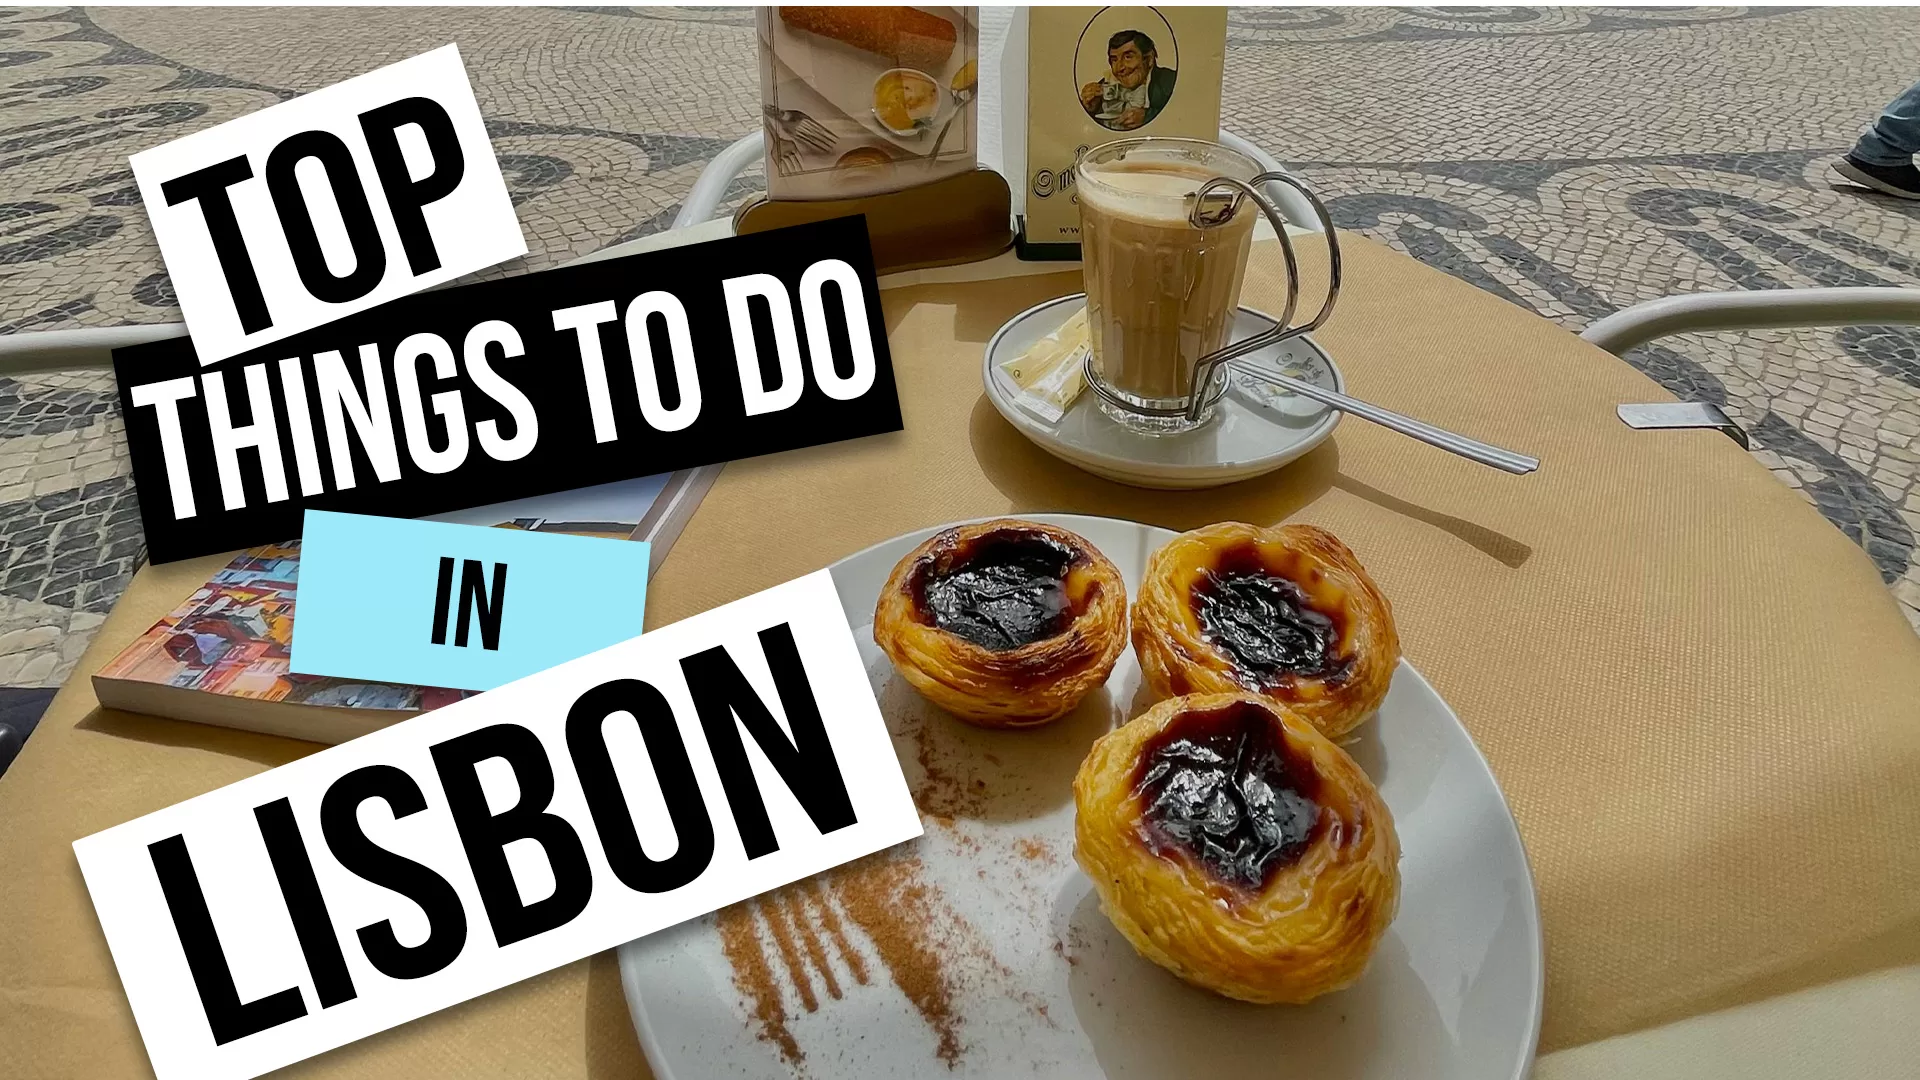 Top Things to do in Lisbon